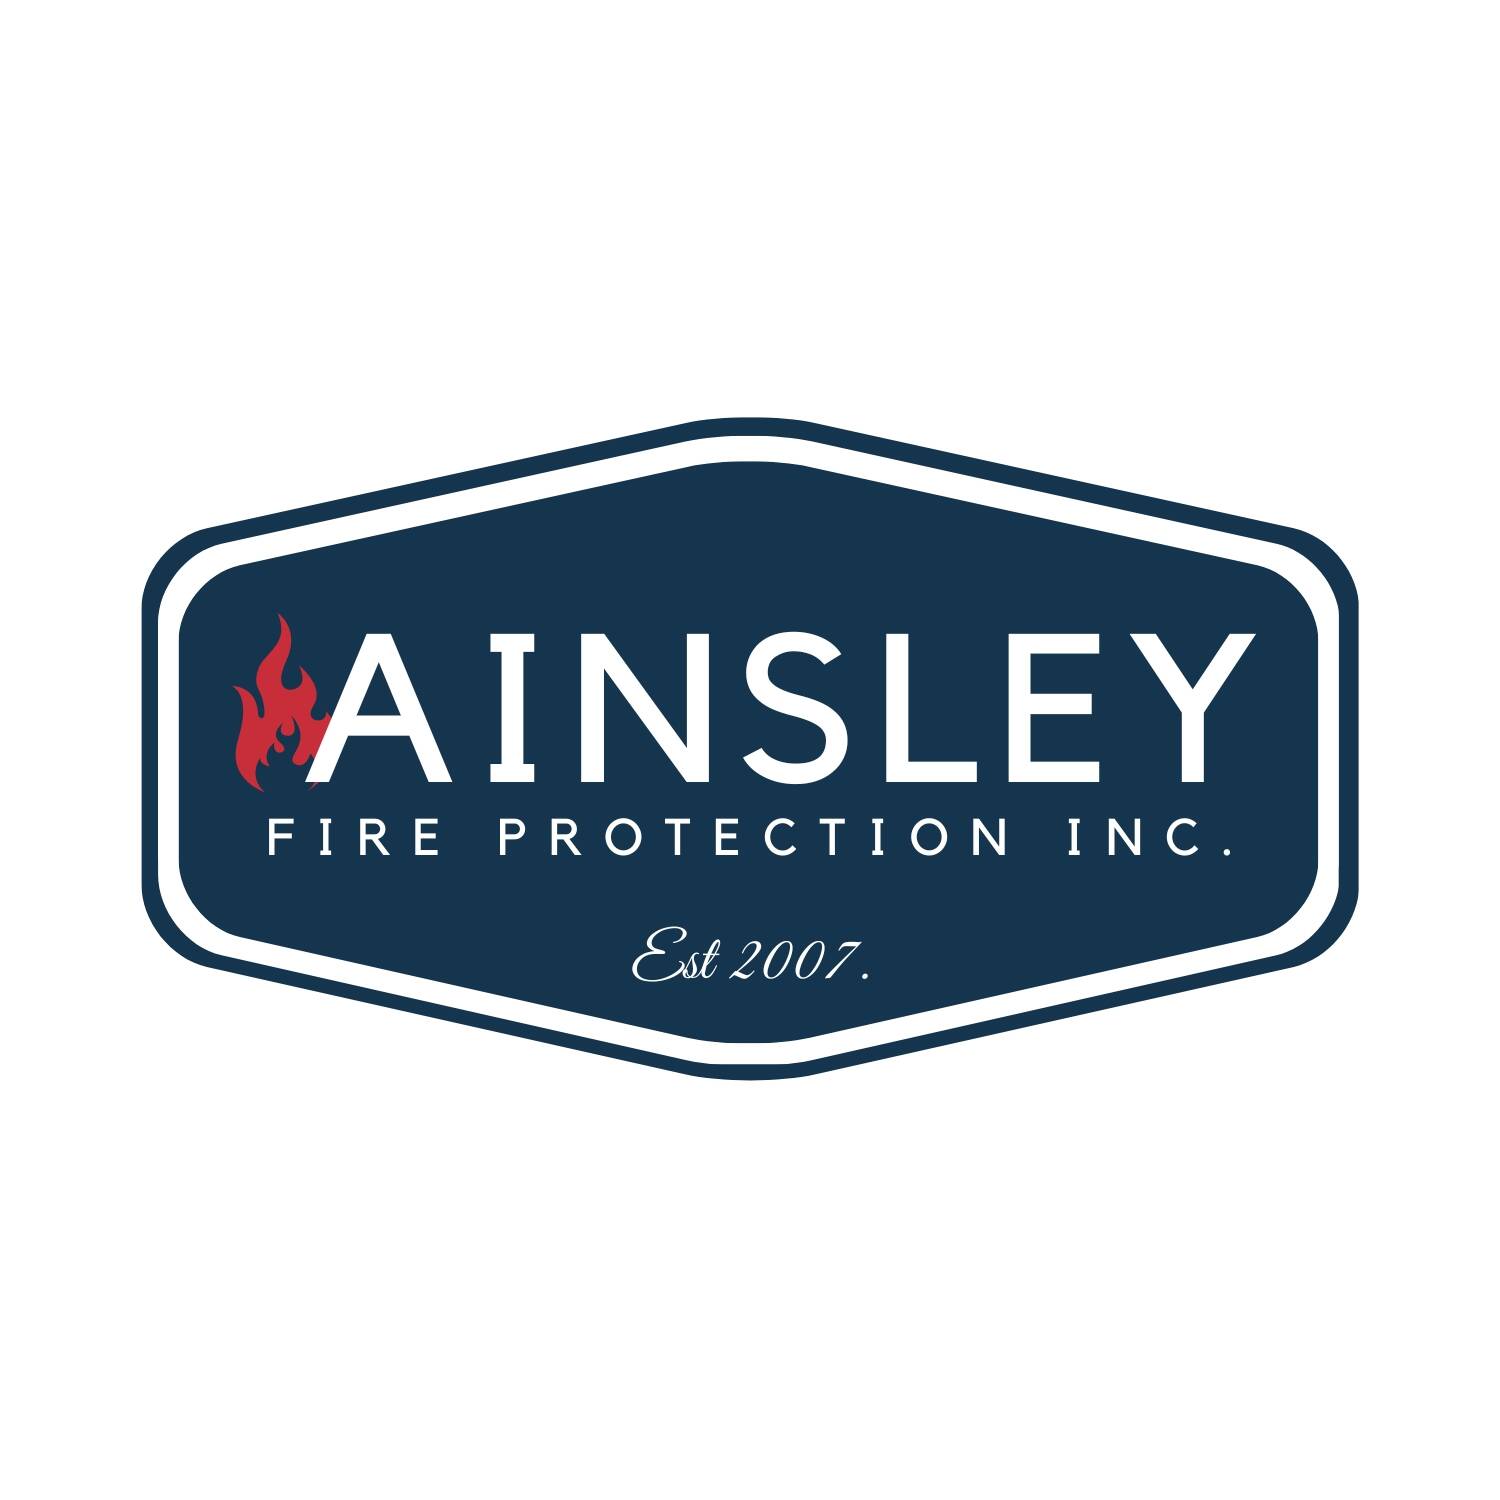 Ainsley Fire Protection